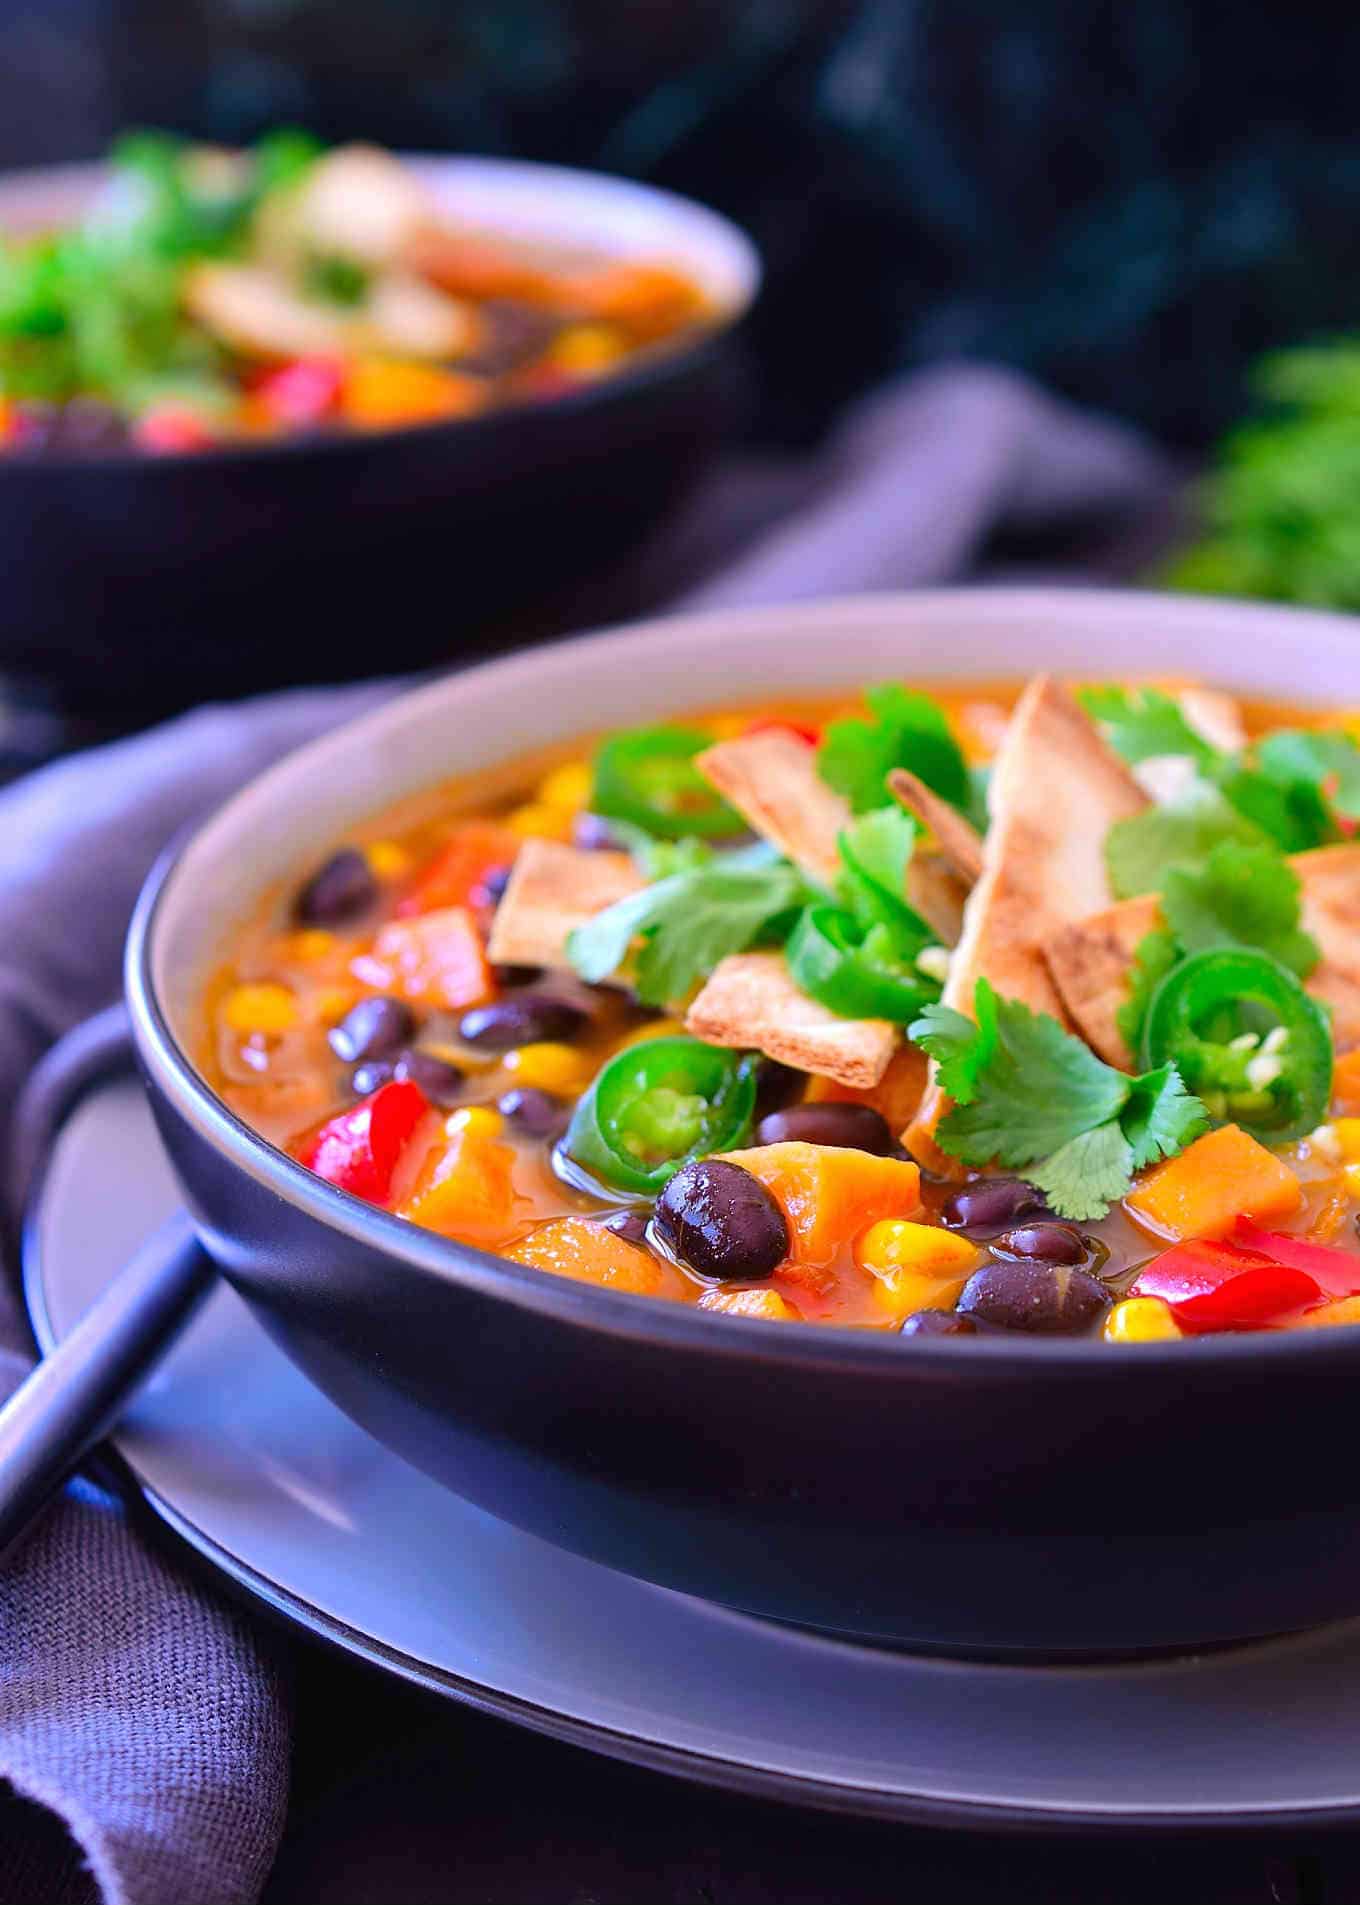 This vegetarian enchilada soup tastes just like ... you guessed it: enchiladas, but in soup form. Not only is it super tasty, it’s much quicker and easier than traditional enchiladas as it can be ready in just 20 minutes! It’s a super lazy, freezer friendly and filling meal that costs less than two dollars a serving.